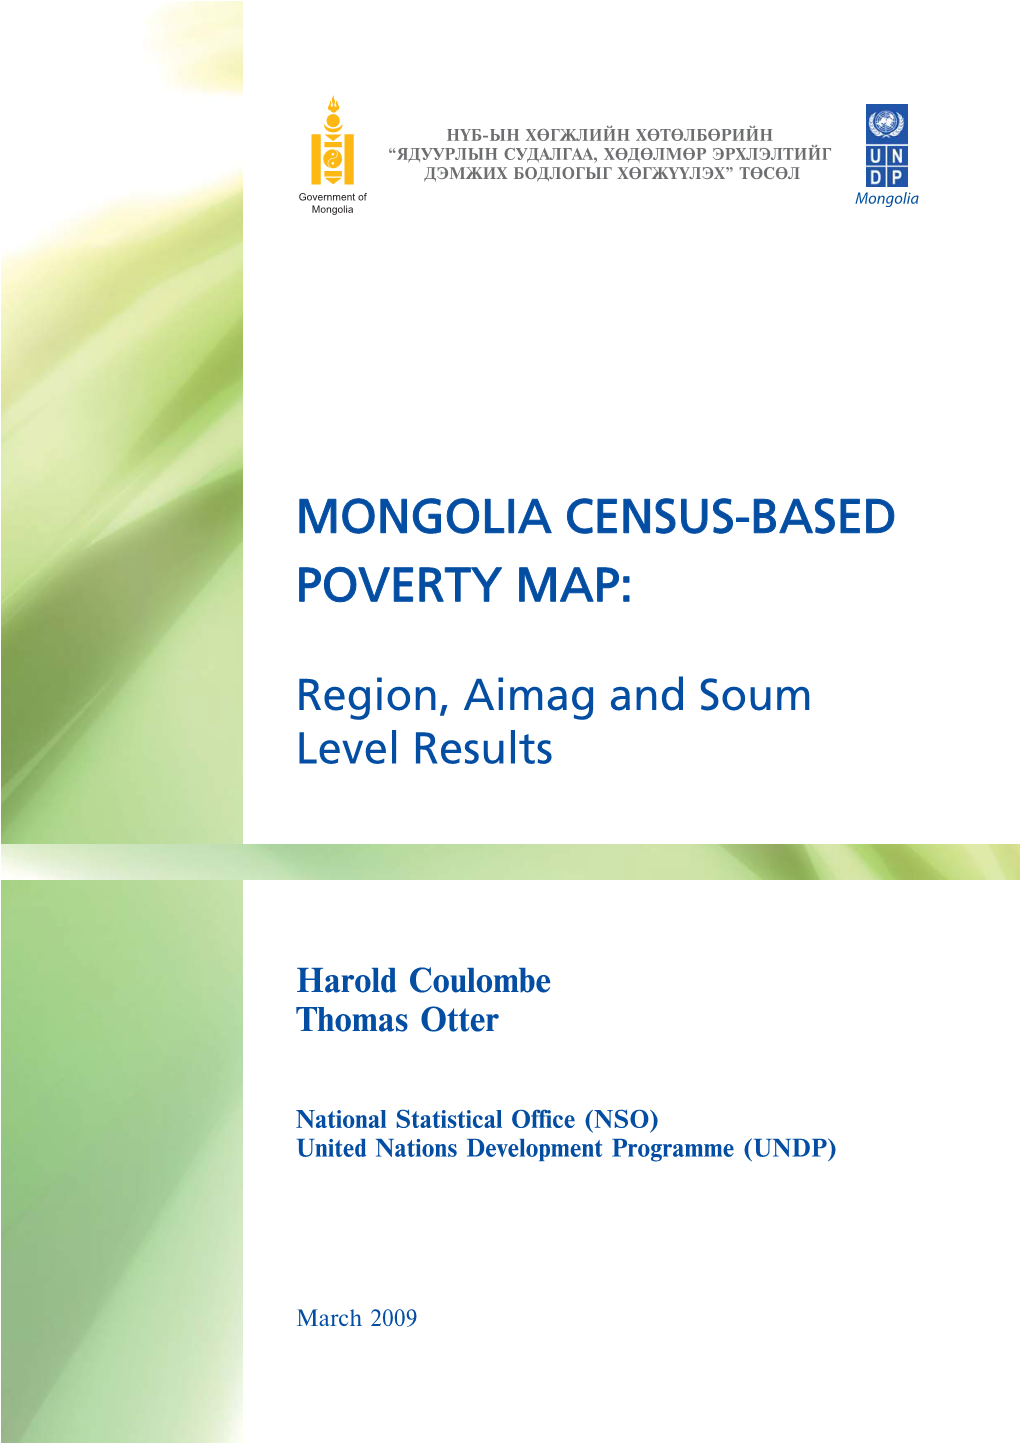 MONGOLIA CENSUS-BASED POVERTY MAP: Region, Aimag and Soum Level Results